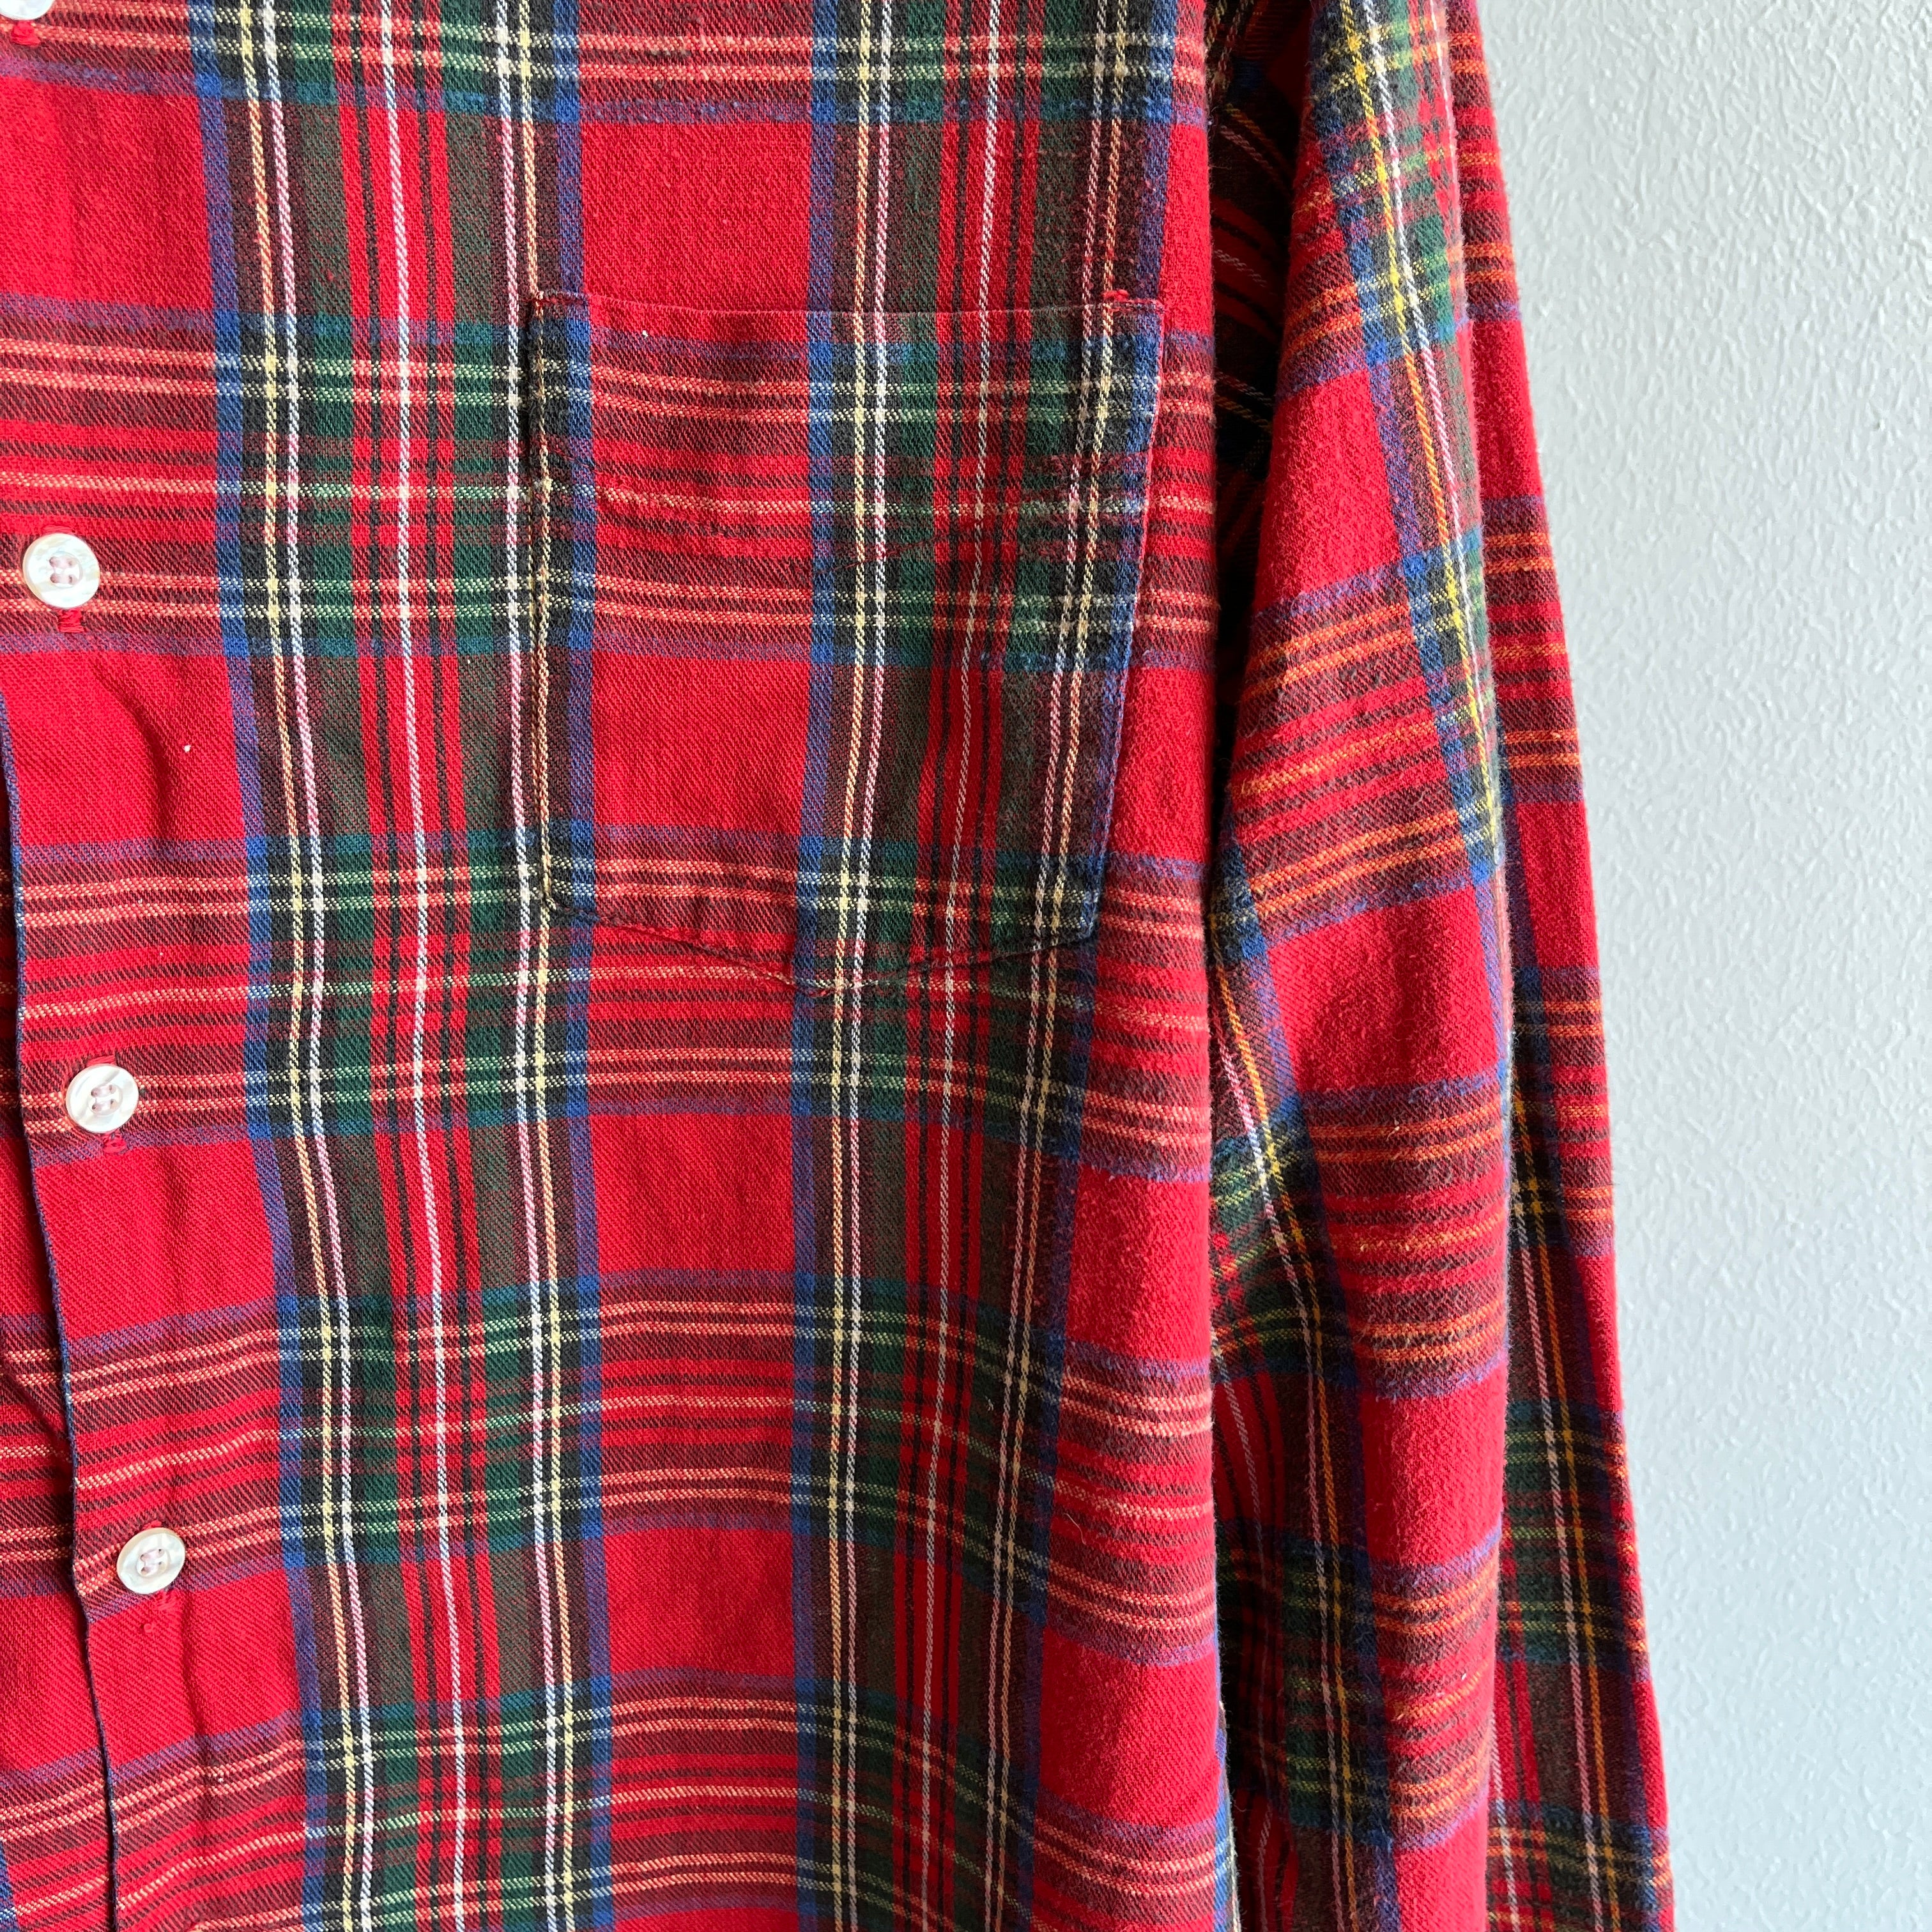 1950/60s L.L. Bean USA MADE Single Pocket Cotton Flannel - THIS!!!!